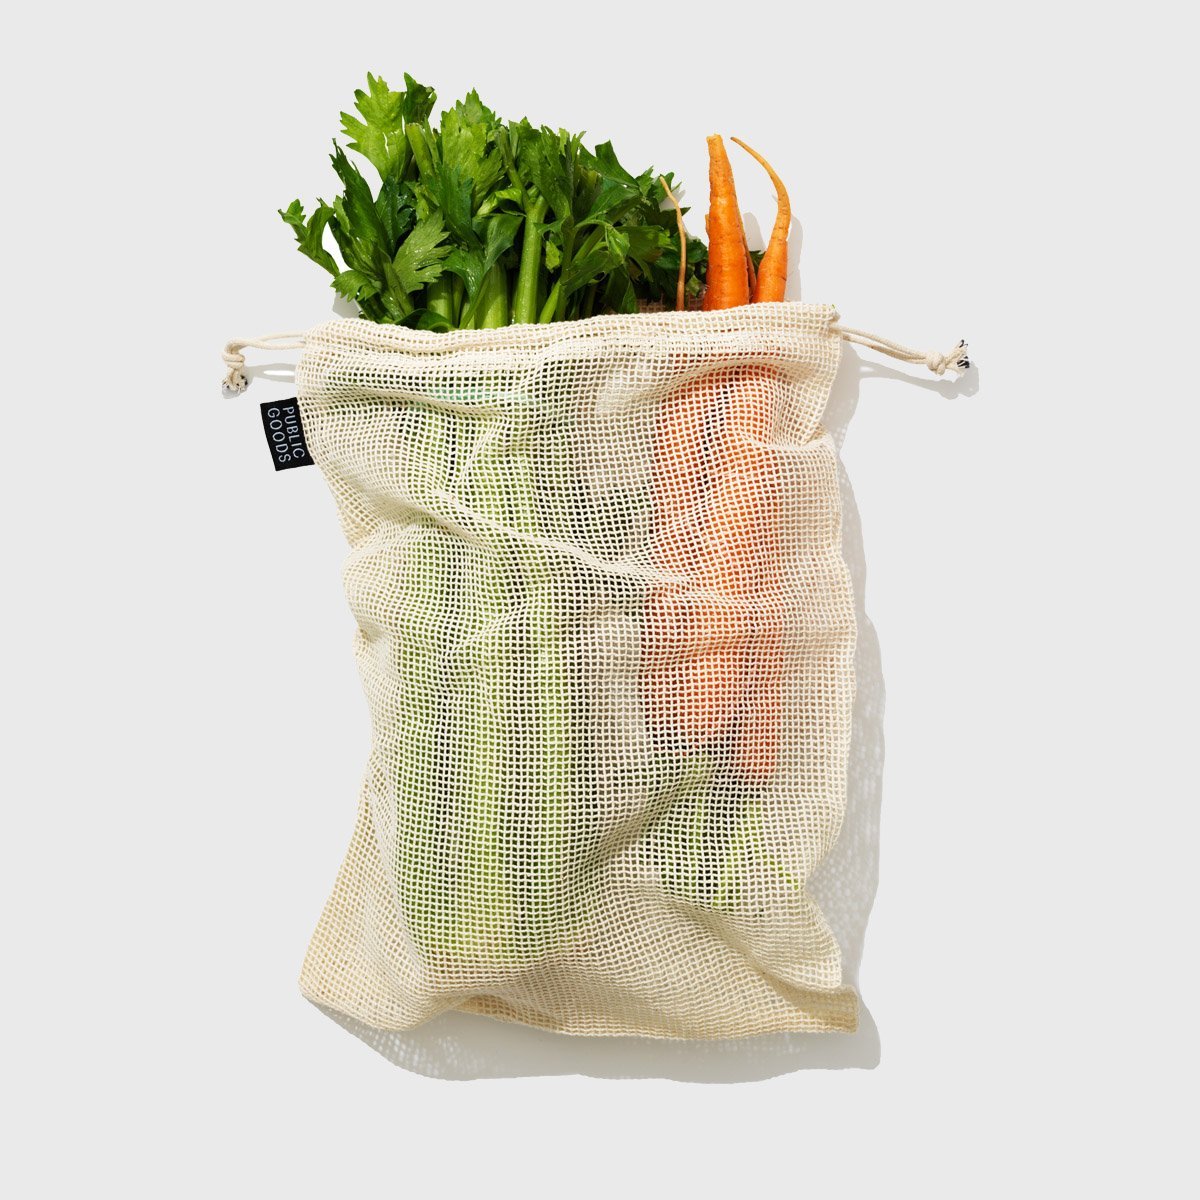 Mesh bags with reusable glass water bottle. Sustainable lifestyle. Zero  waste concept. No plastic. Stock Photo by FabrikaPhoto